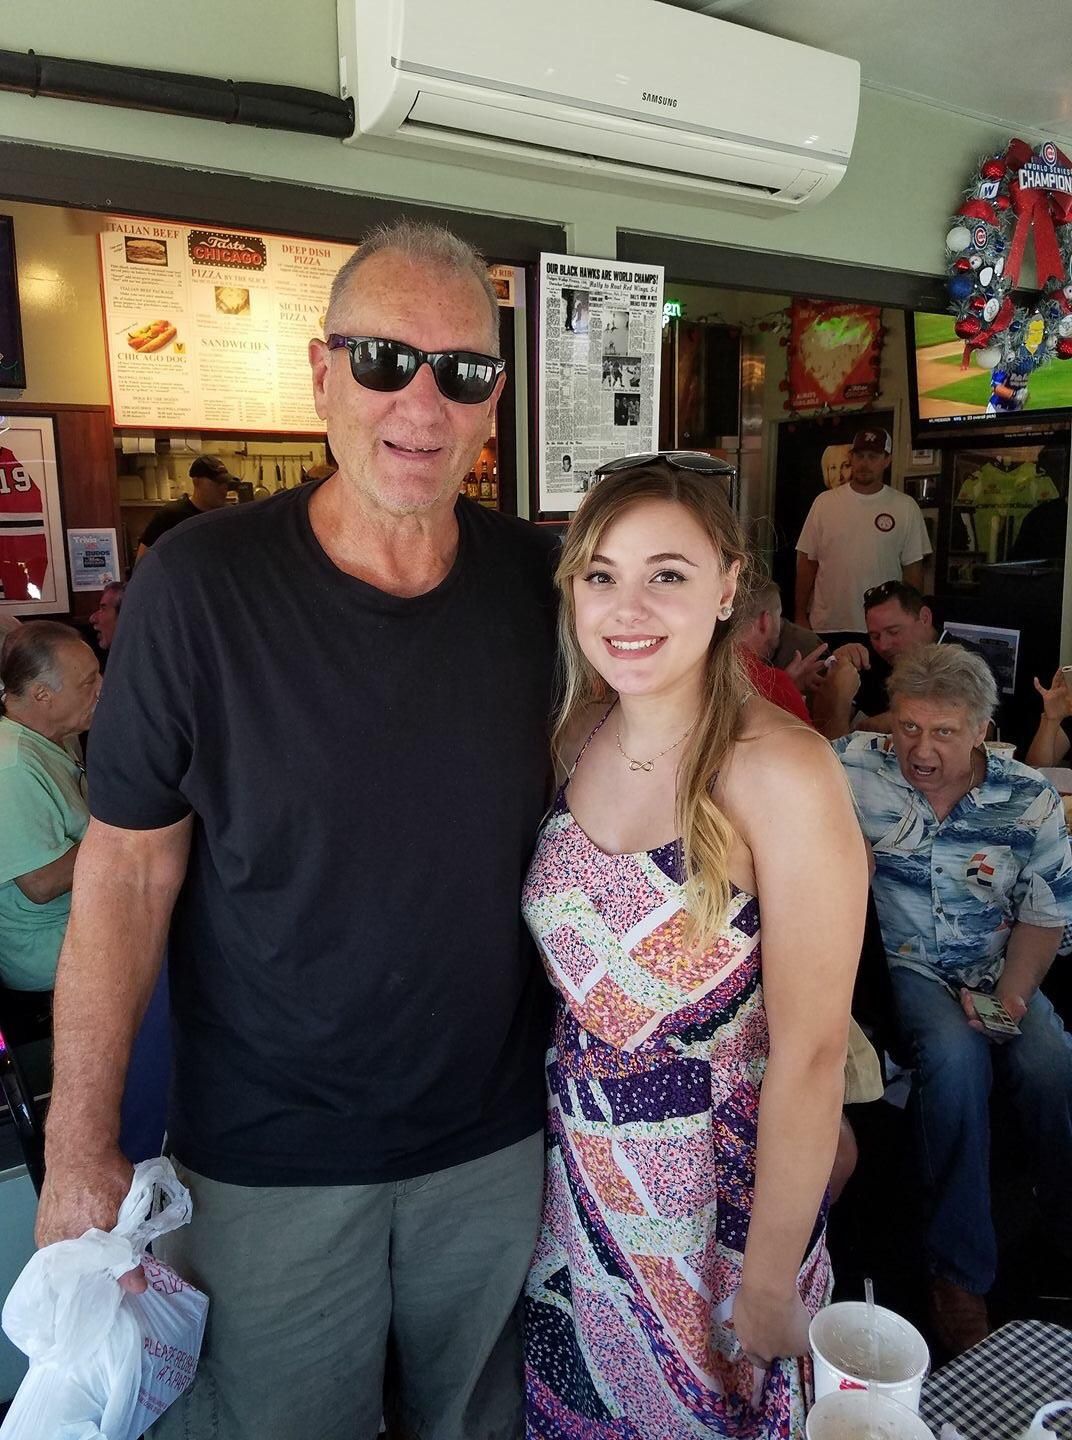 My FB friend met Ed O'Neill and the guy behind her can't f*cking believe it